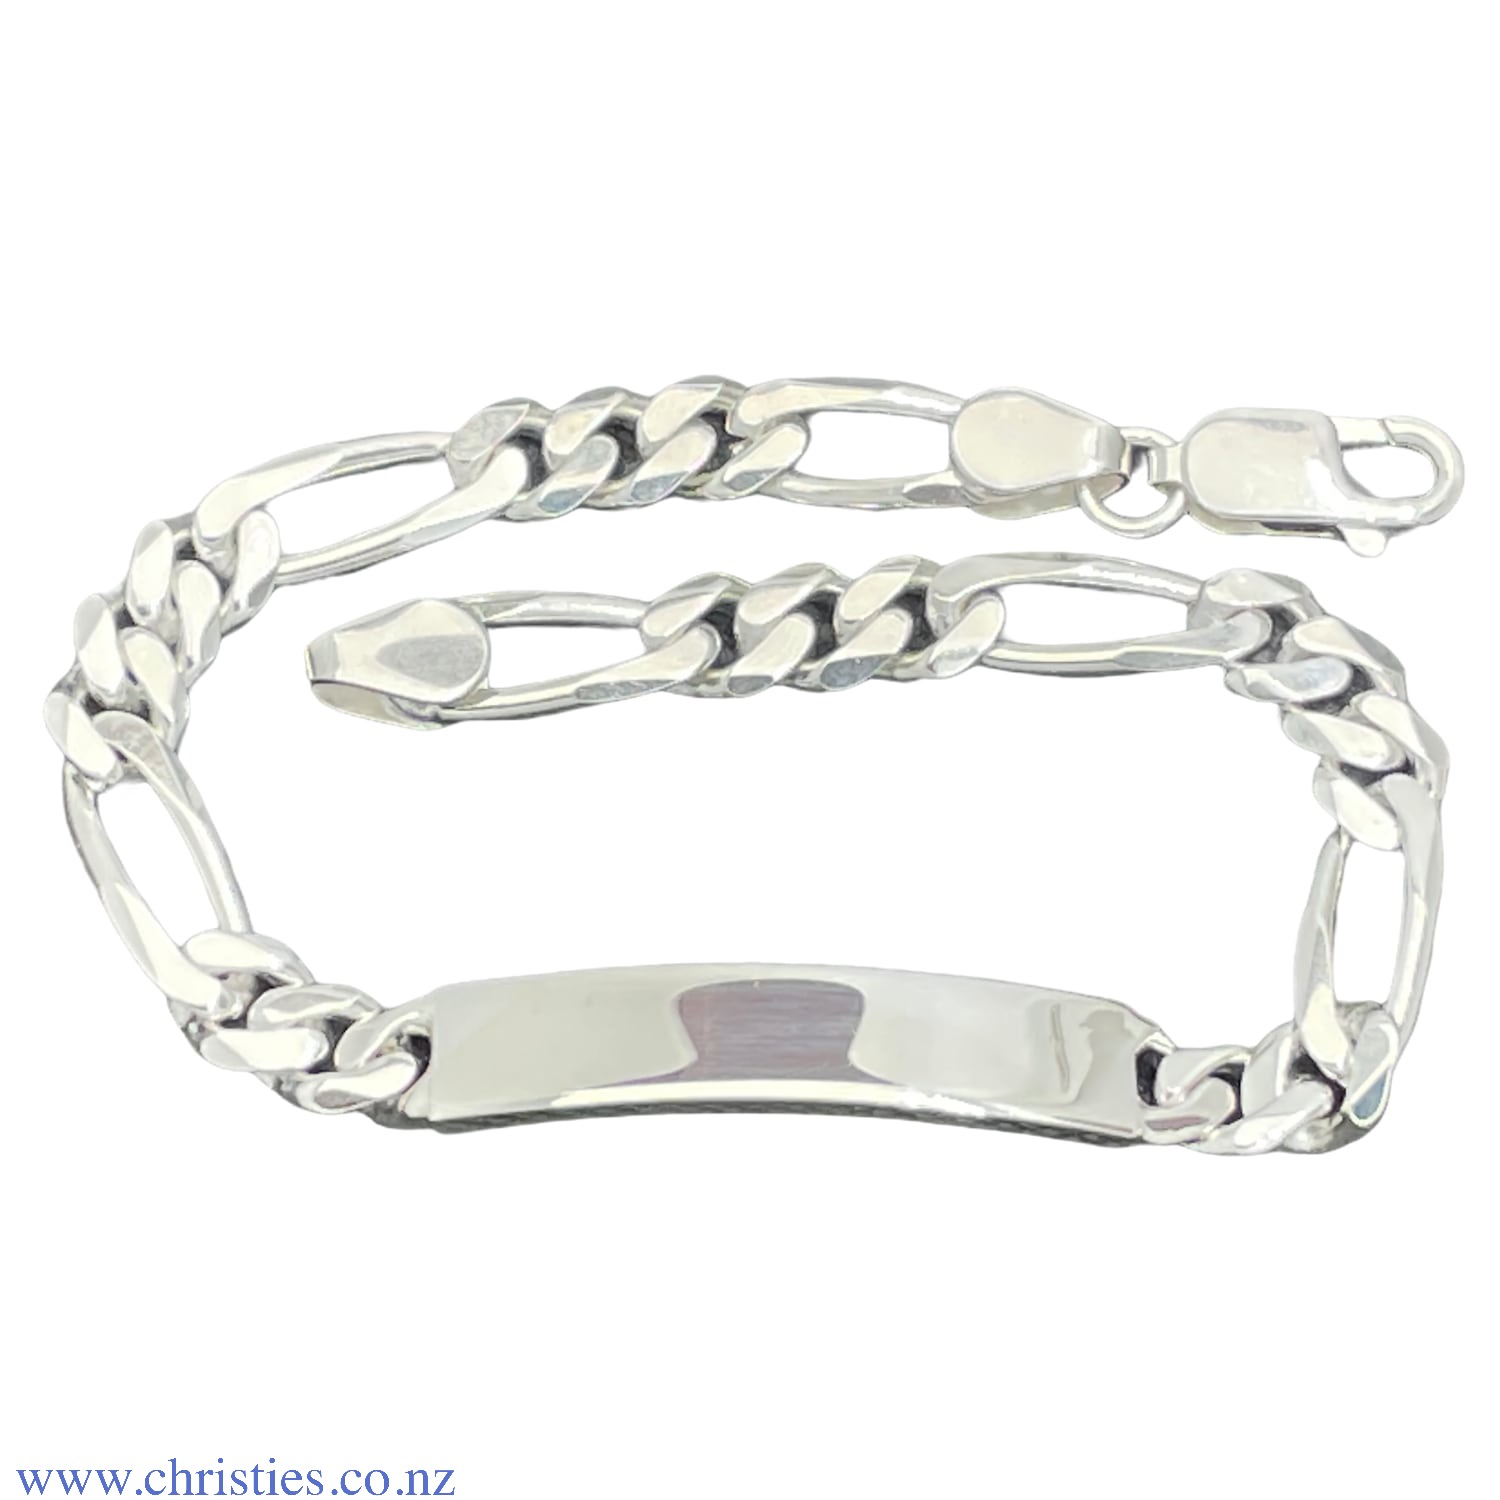 37751 Sterling Silver ID Figaro Bracelet. Identification braclet crafted in 925 sterling silver  LAYBUY - Pay it easy, in 6 weekly payments and have it now. Only pay the price of your purchase, when you pay your instalments on time. A late fee may @christ